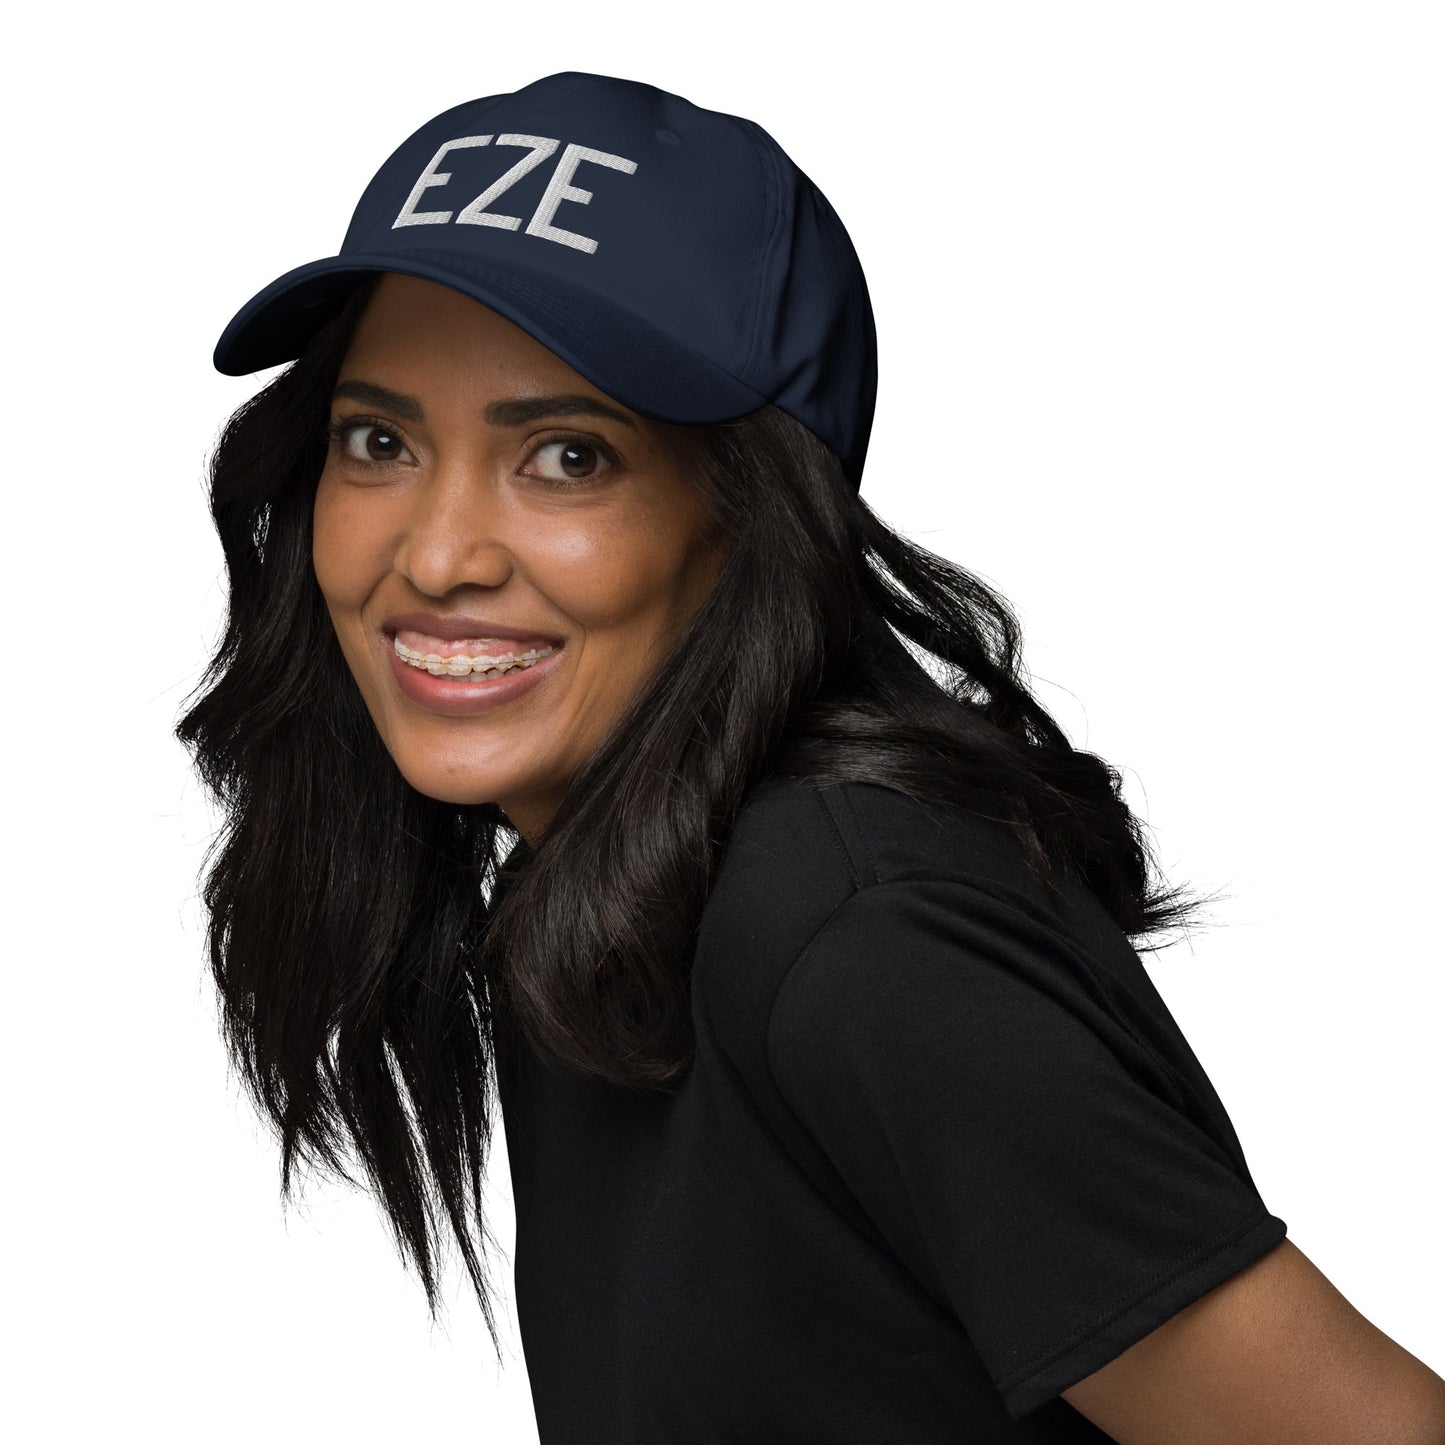 Airport Code Baseball Cap - White • EZE Buenos Aires • YHM Designs - Image 04